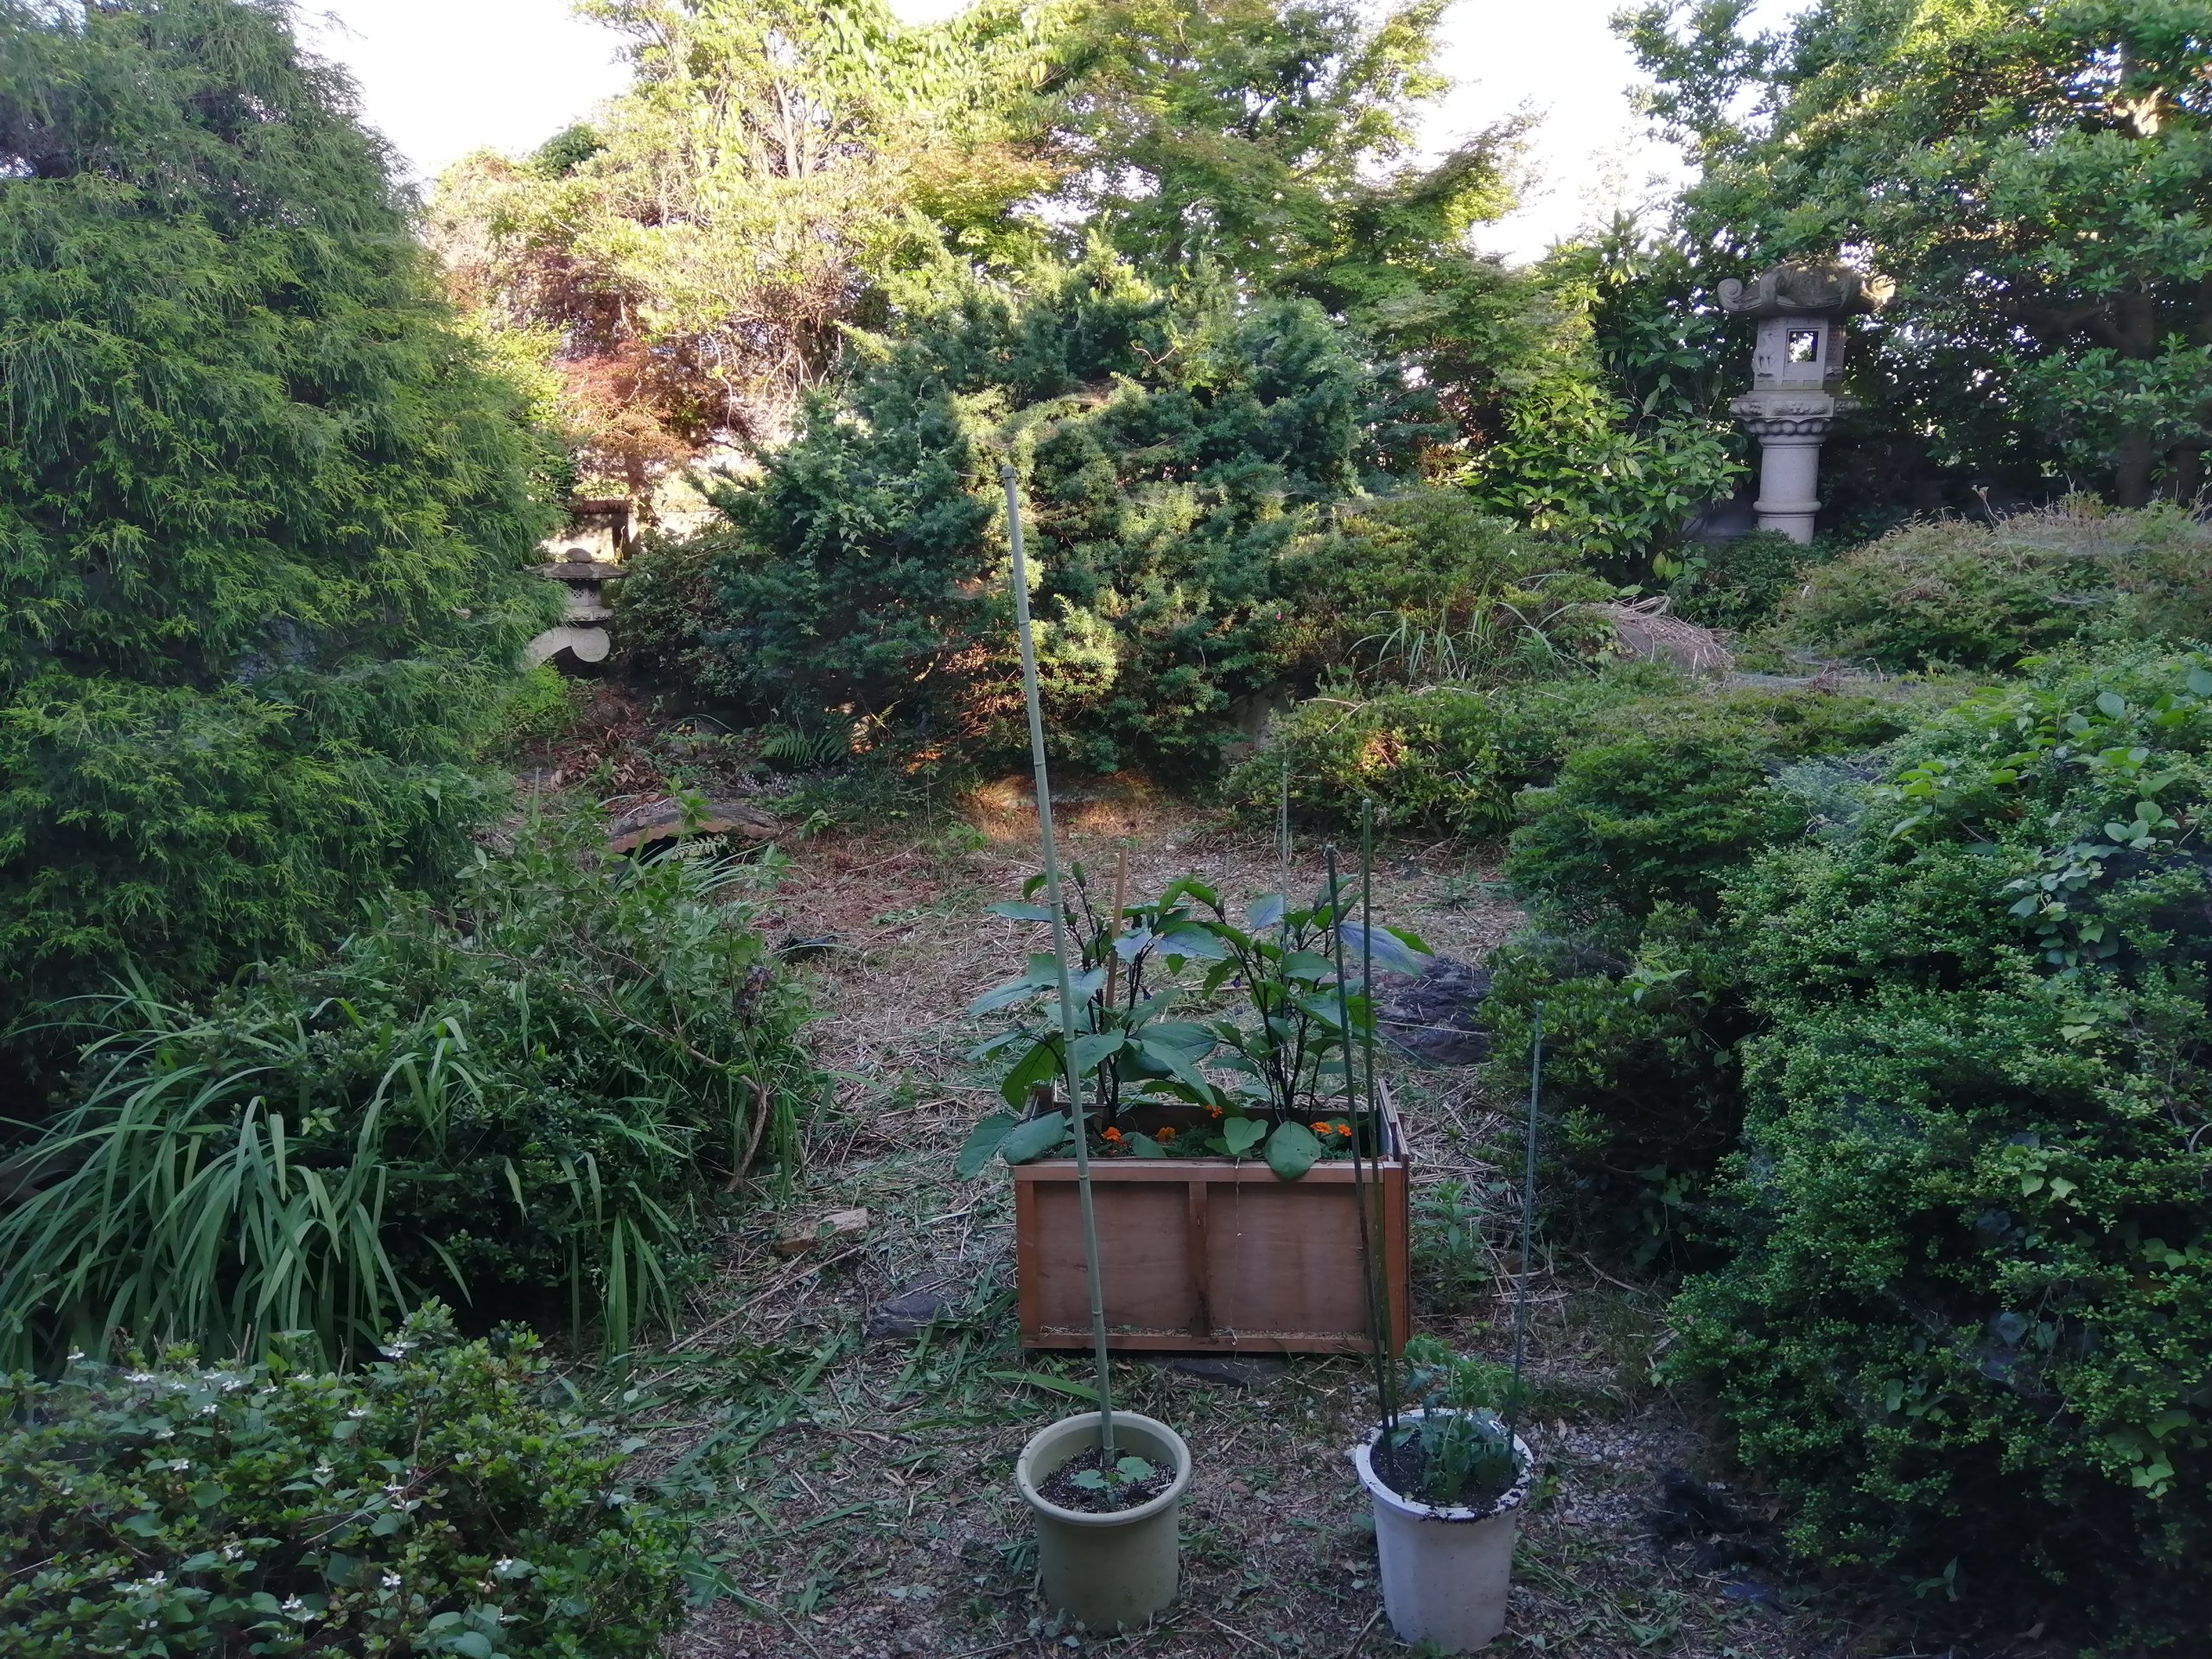 Clearing out my backyard slowly but surely.